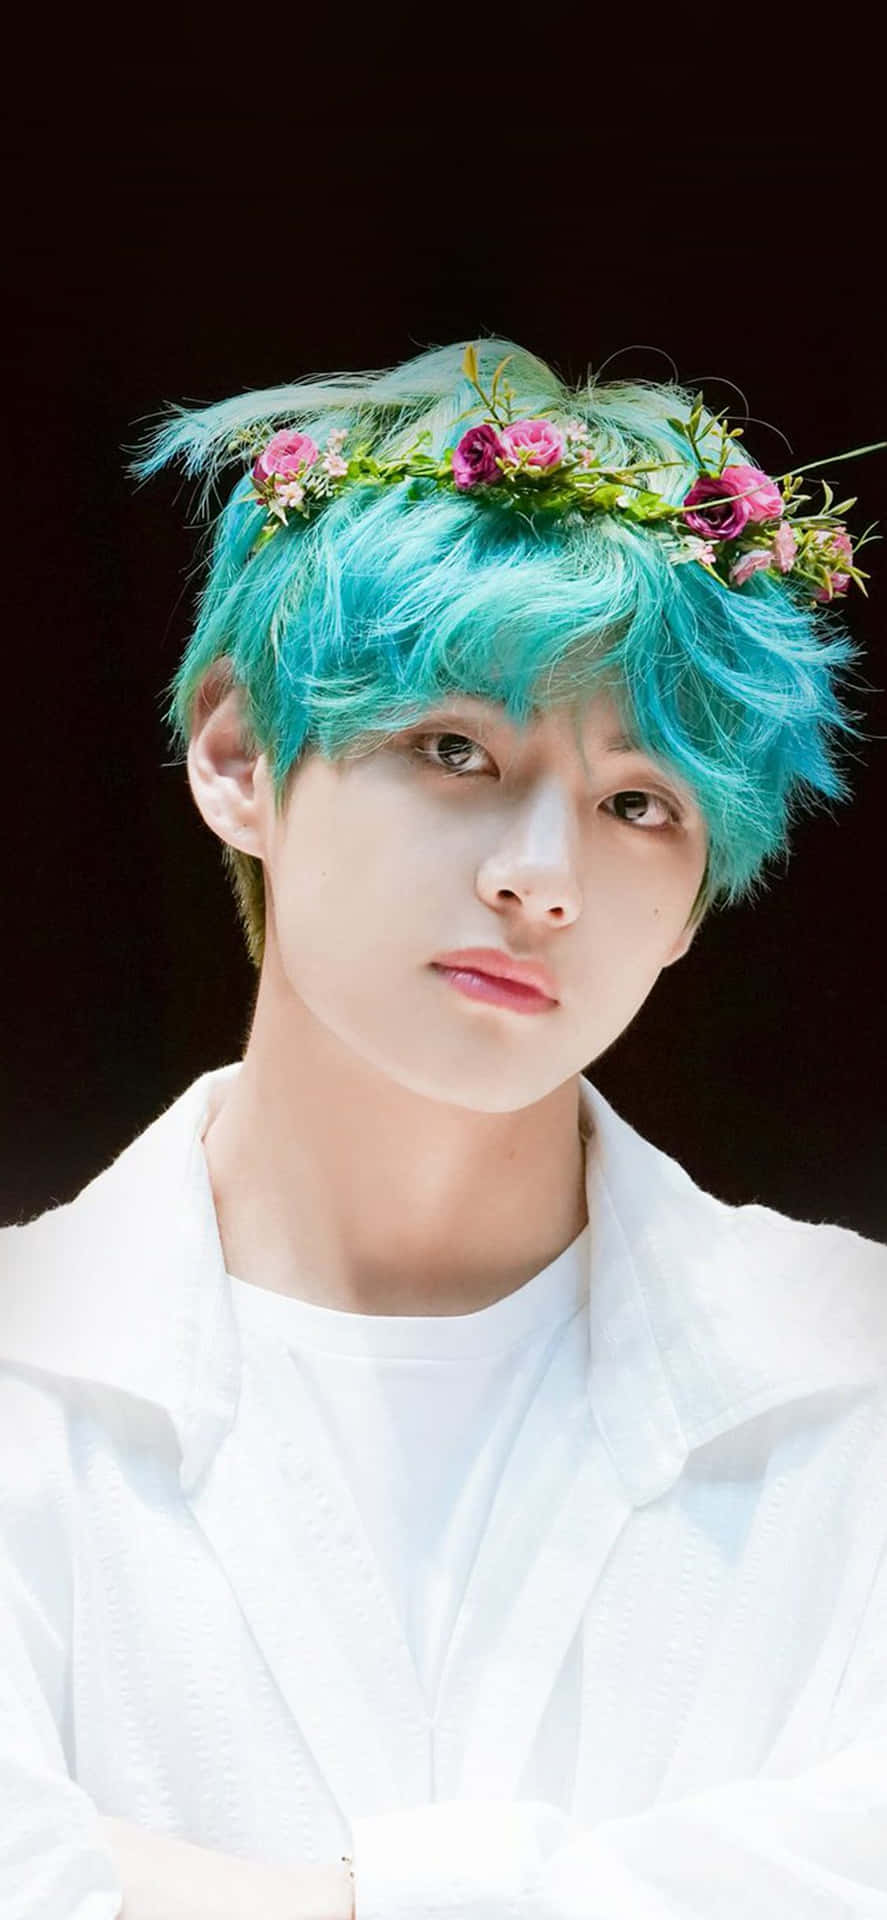 Taehyung Flower Crown Picture